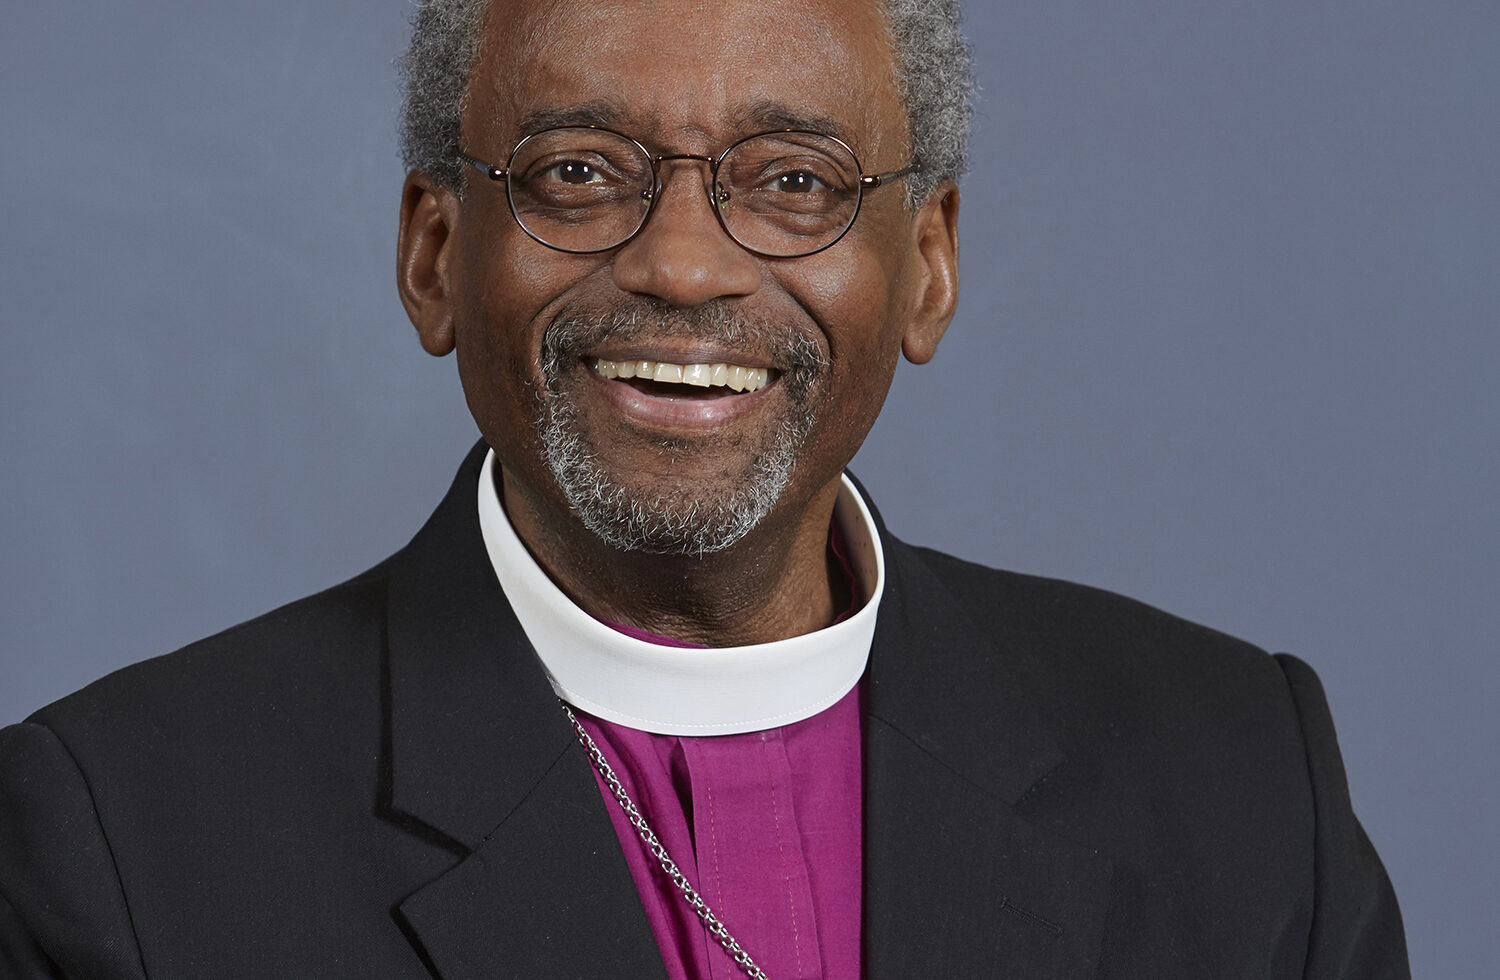 Biography: The Most Rev. Michael Curry